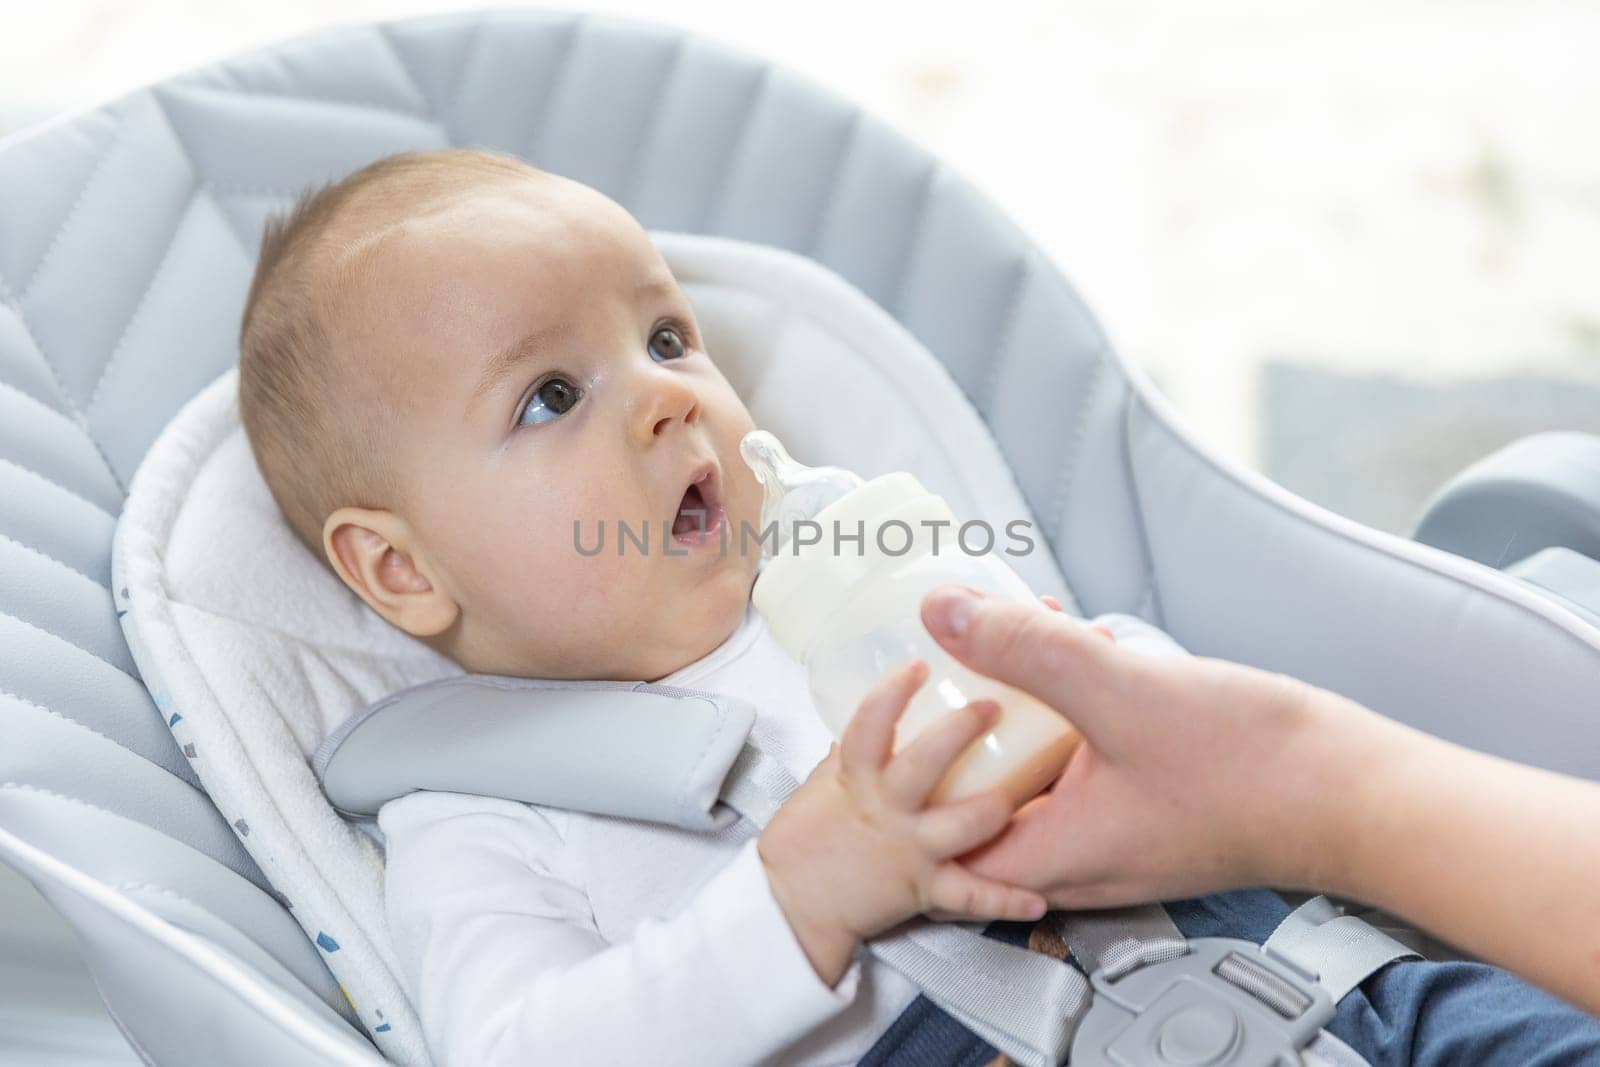 Newborn baby drinking water from a bottle, healthcare concept by Kadula